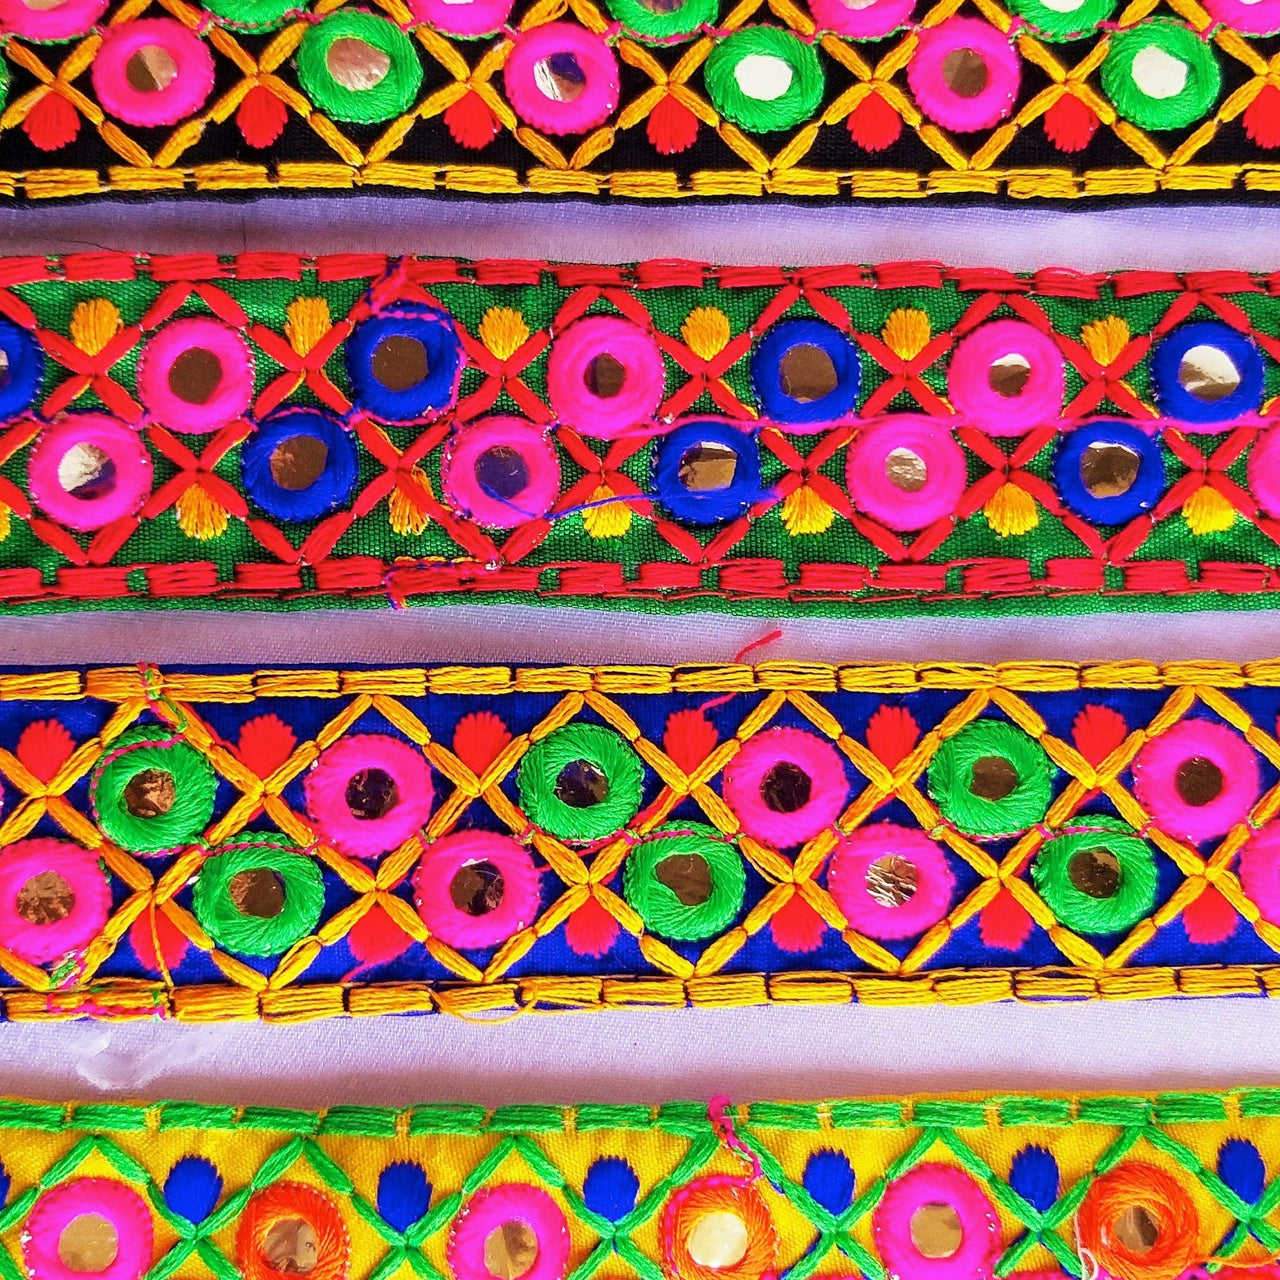 Black Cotton Fabric Mirrored Trim With Embroidery In Fuchsia Pink, Green, Red & Yellow Threads